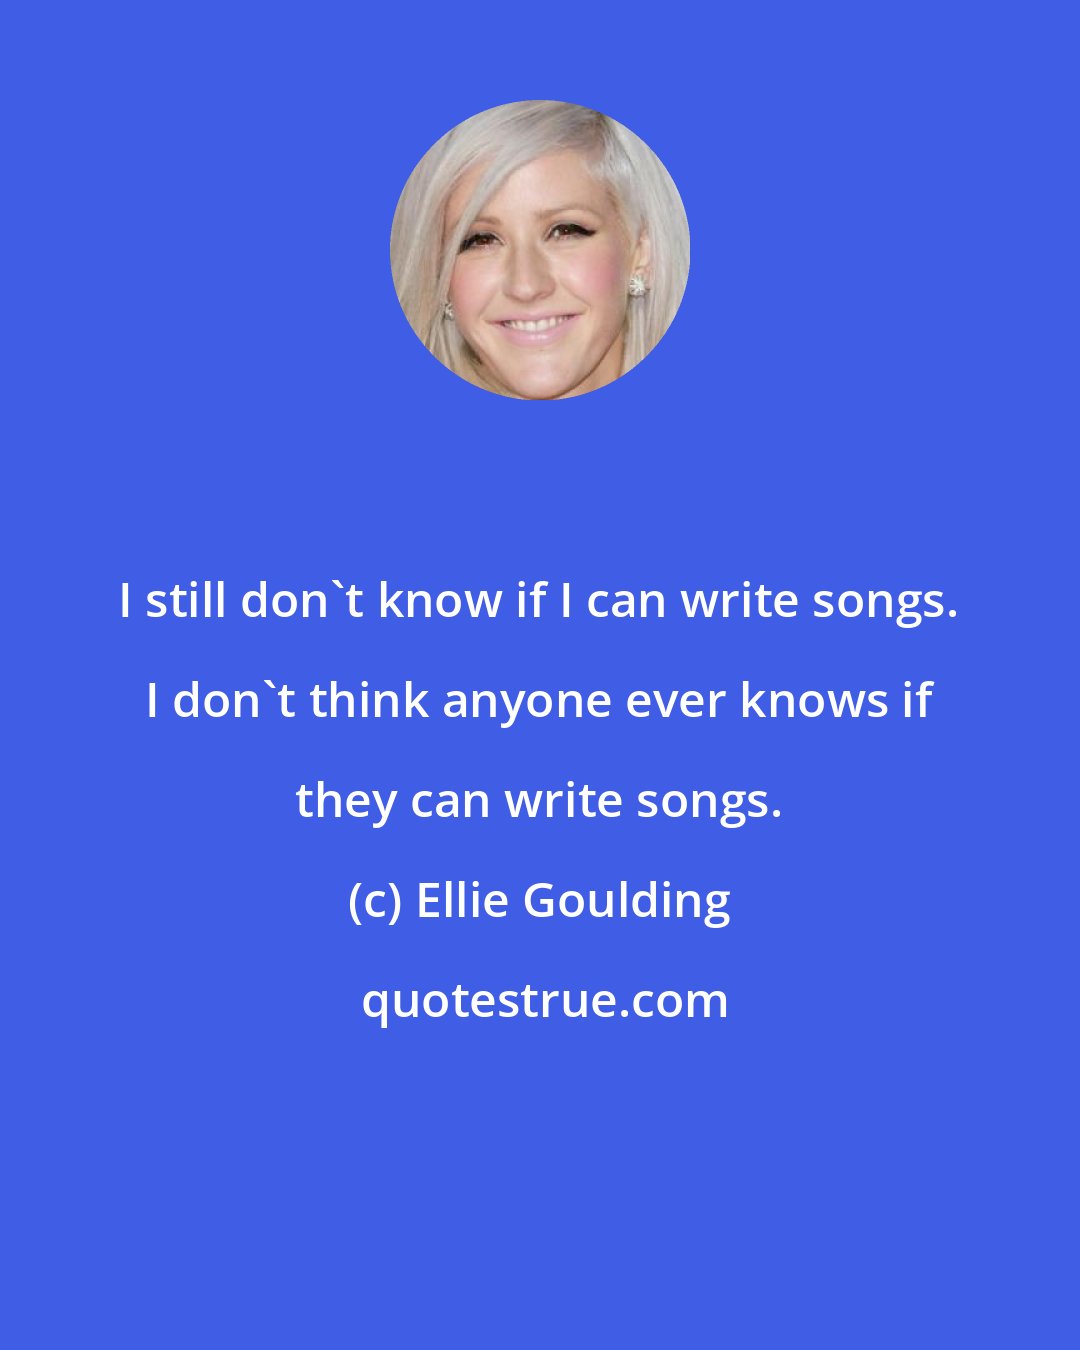 Ellie Goulding: I still don't know if I can write songs. I don't think anyone ever knows if they can write songs.